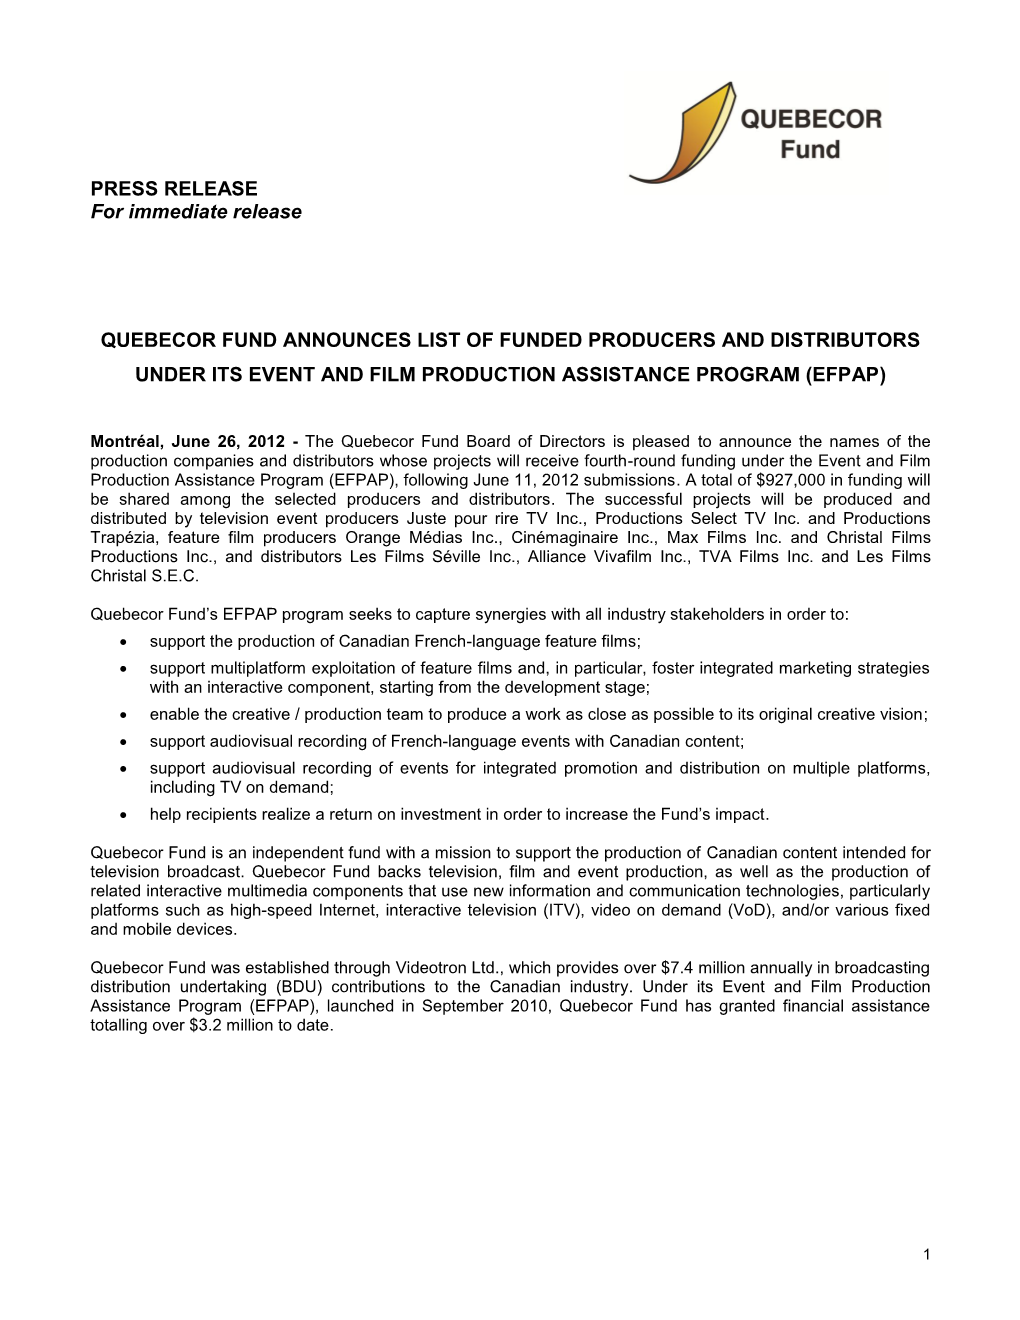 PRESS RELEASE for Immediate Release QUEBECOR FUND